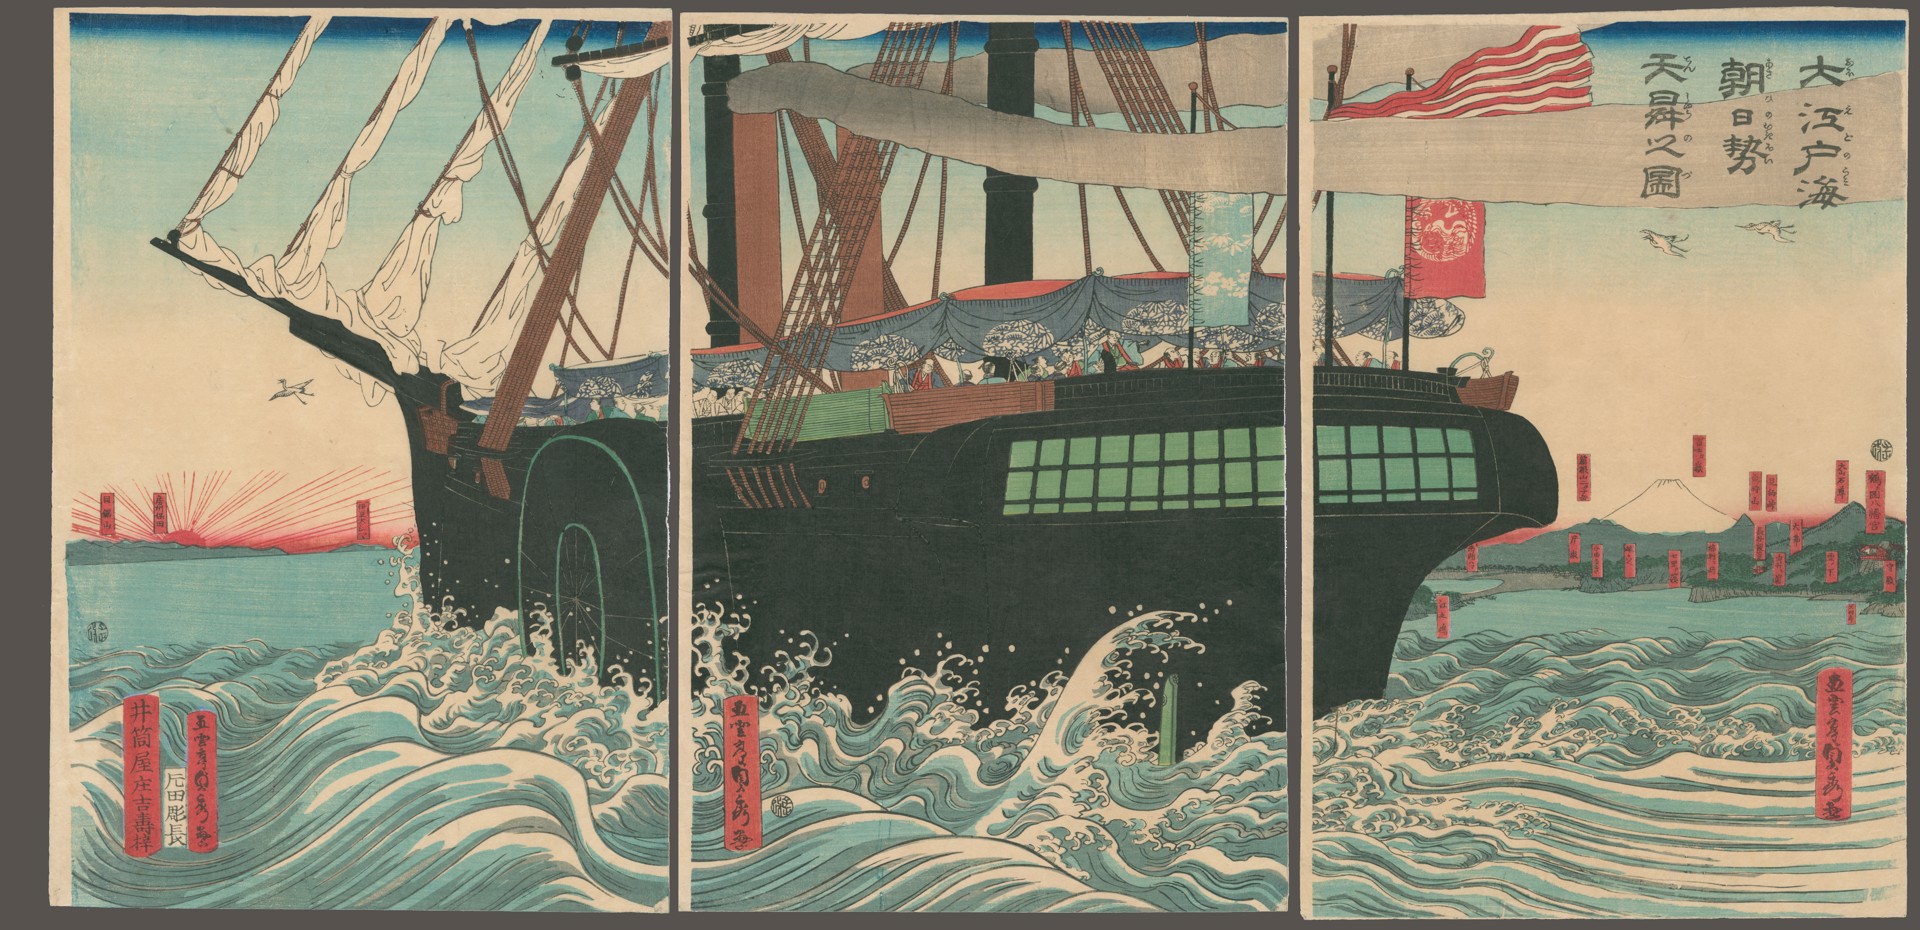 The Dai Edo Speeds Out to Sea at Dawn on a Beautiful Day by Sadahide